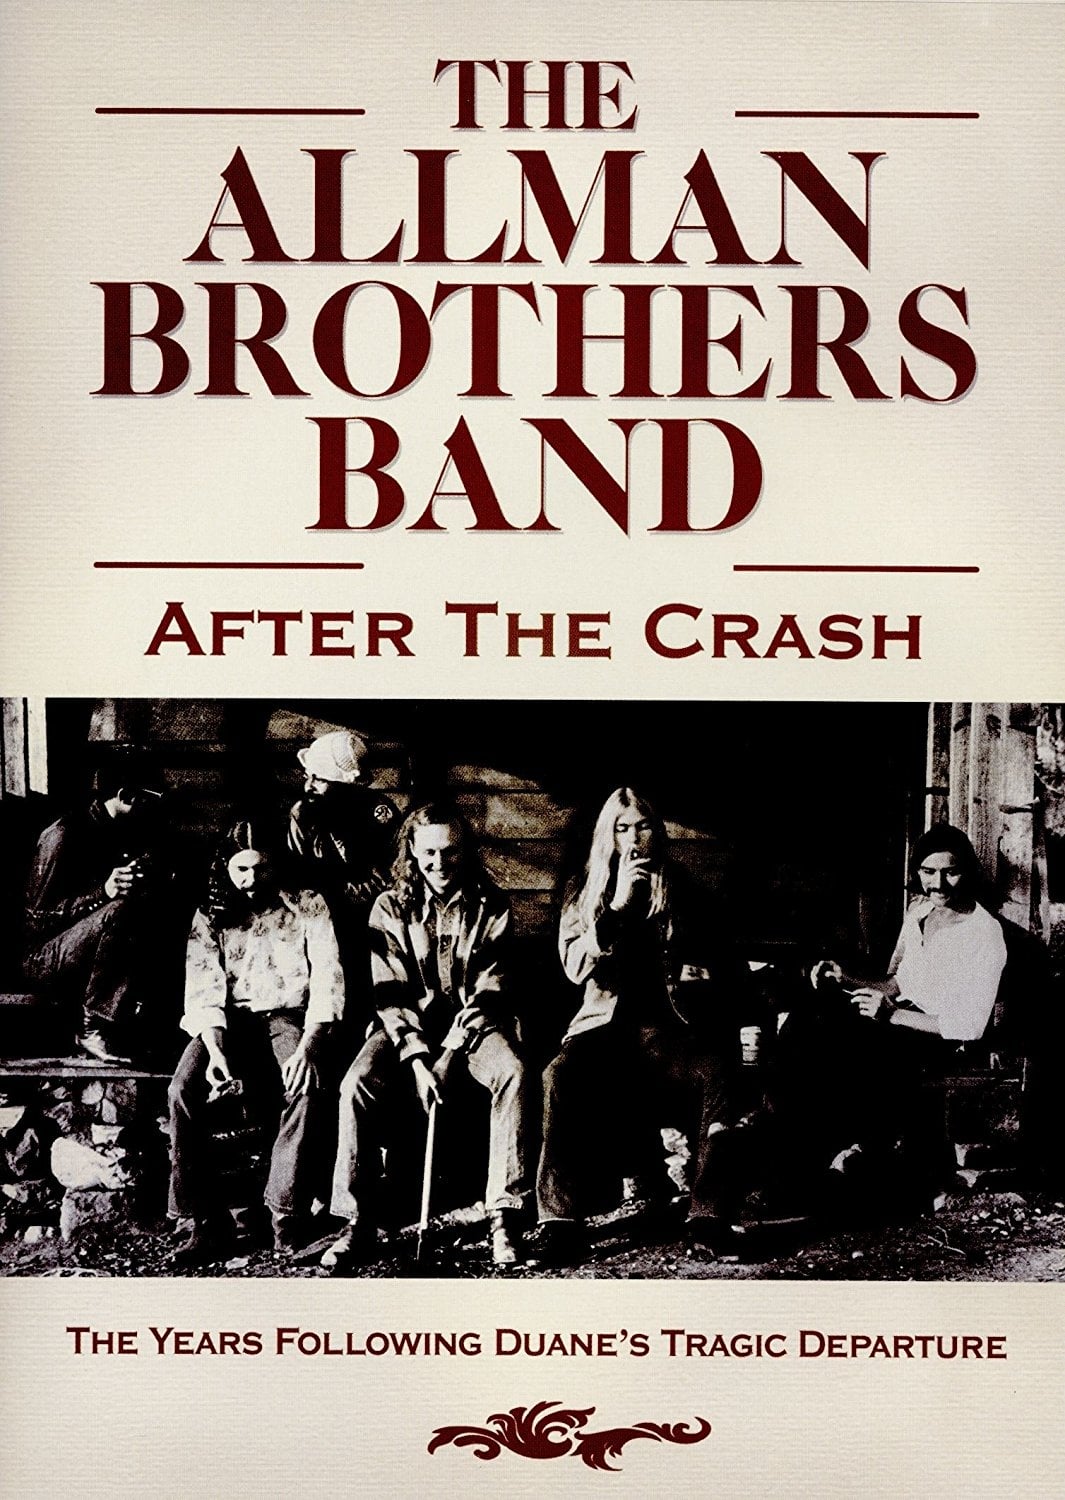 The Allman Brothers Band - After the Crash